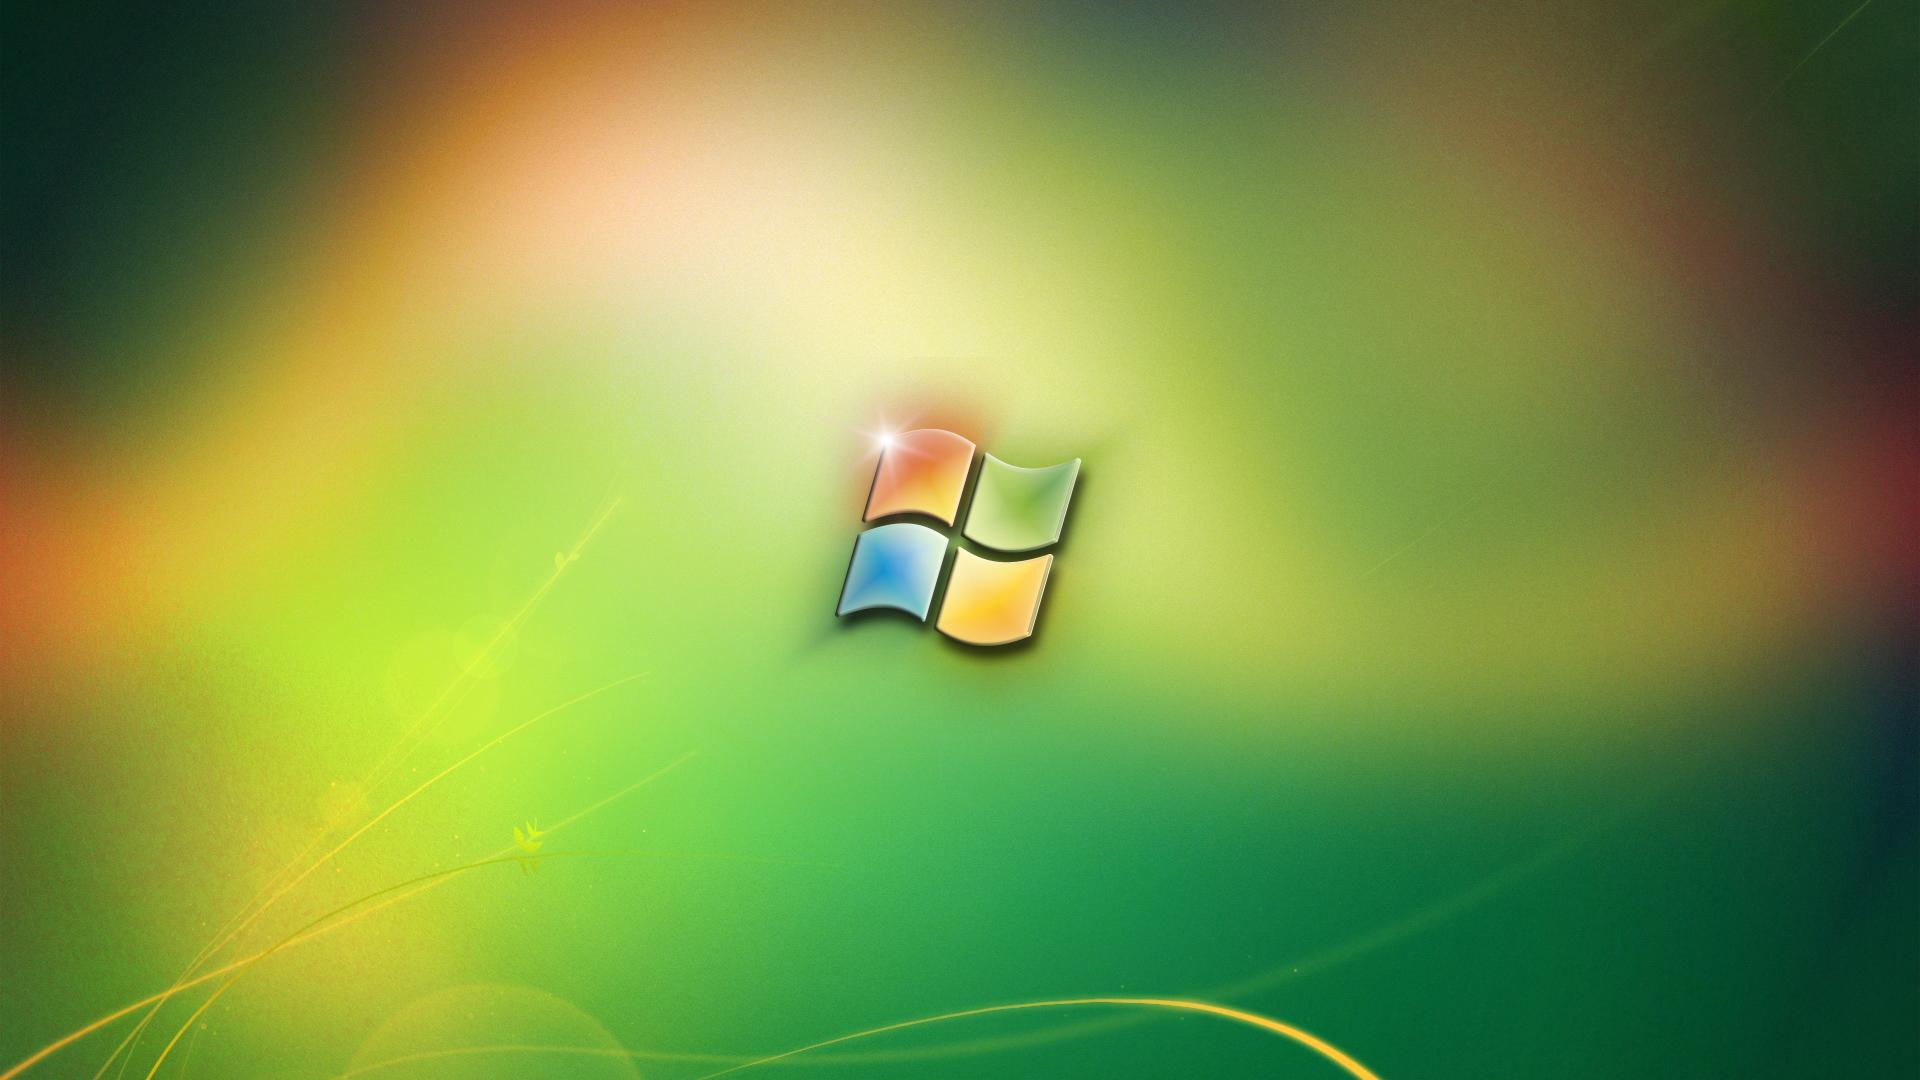 Colorful Windows Xp Backgrounds Widescreen and HD background Wallpaper